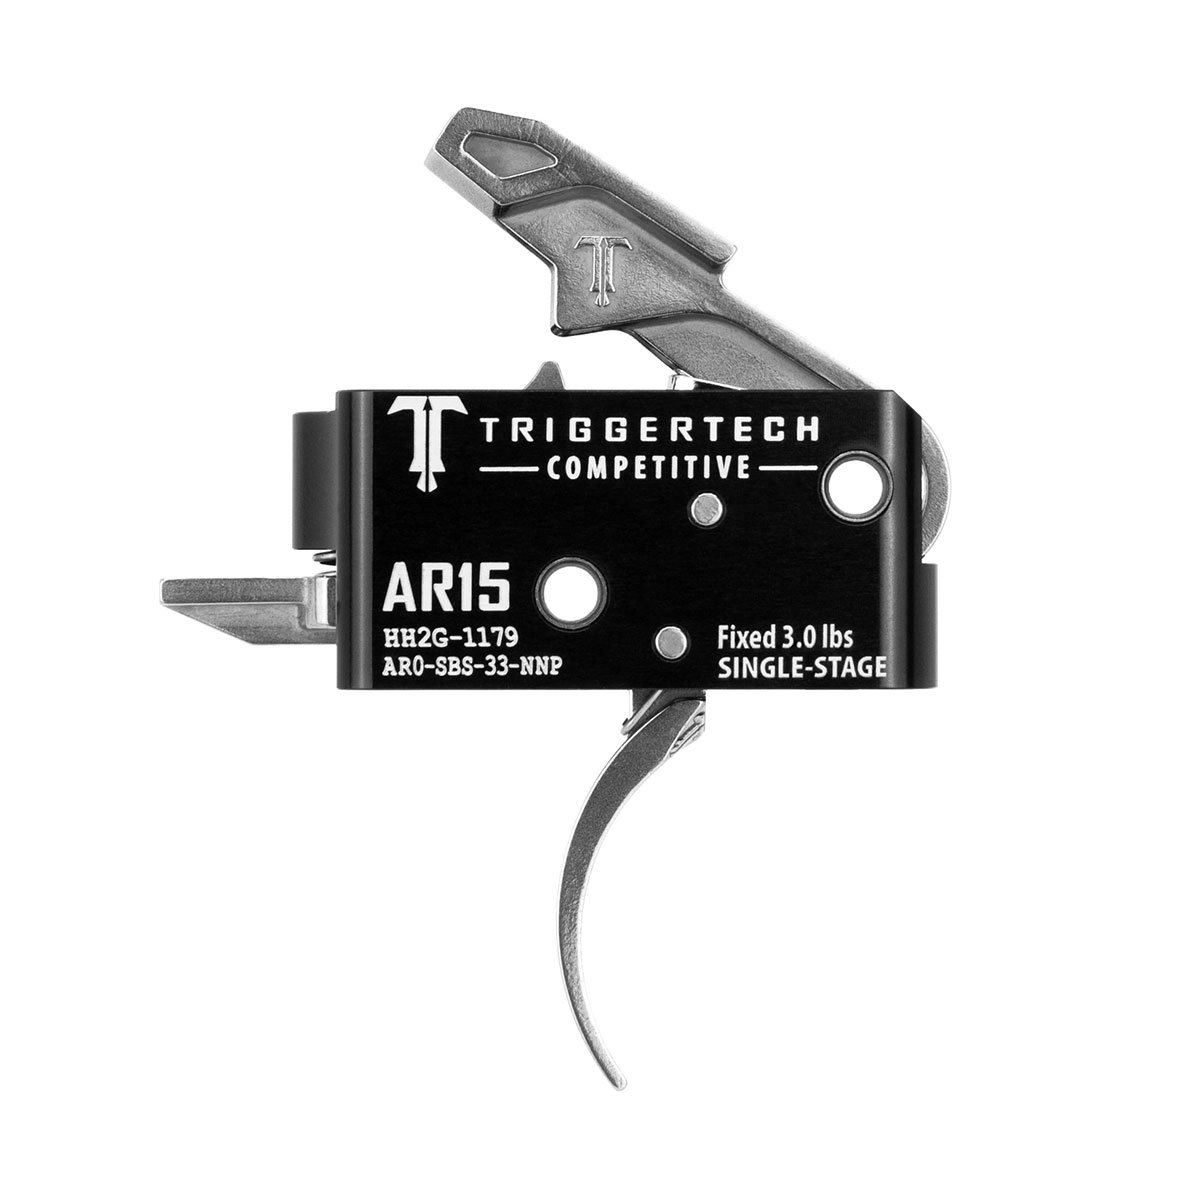 TRIGGERTECH - AR15 SINGLE-STAGE COMPETITIVE TRIGGERS